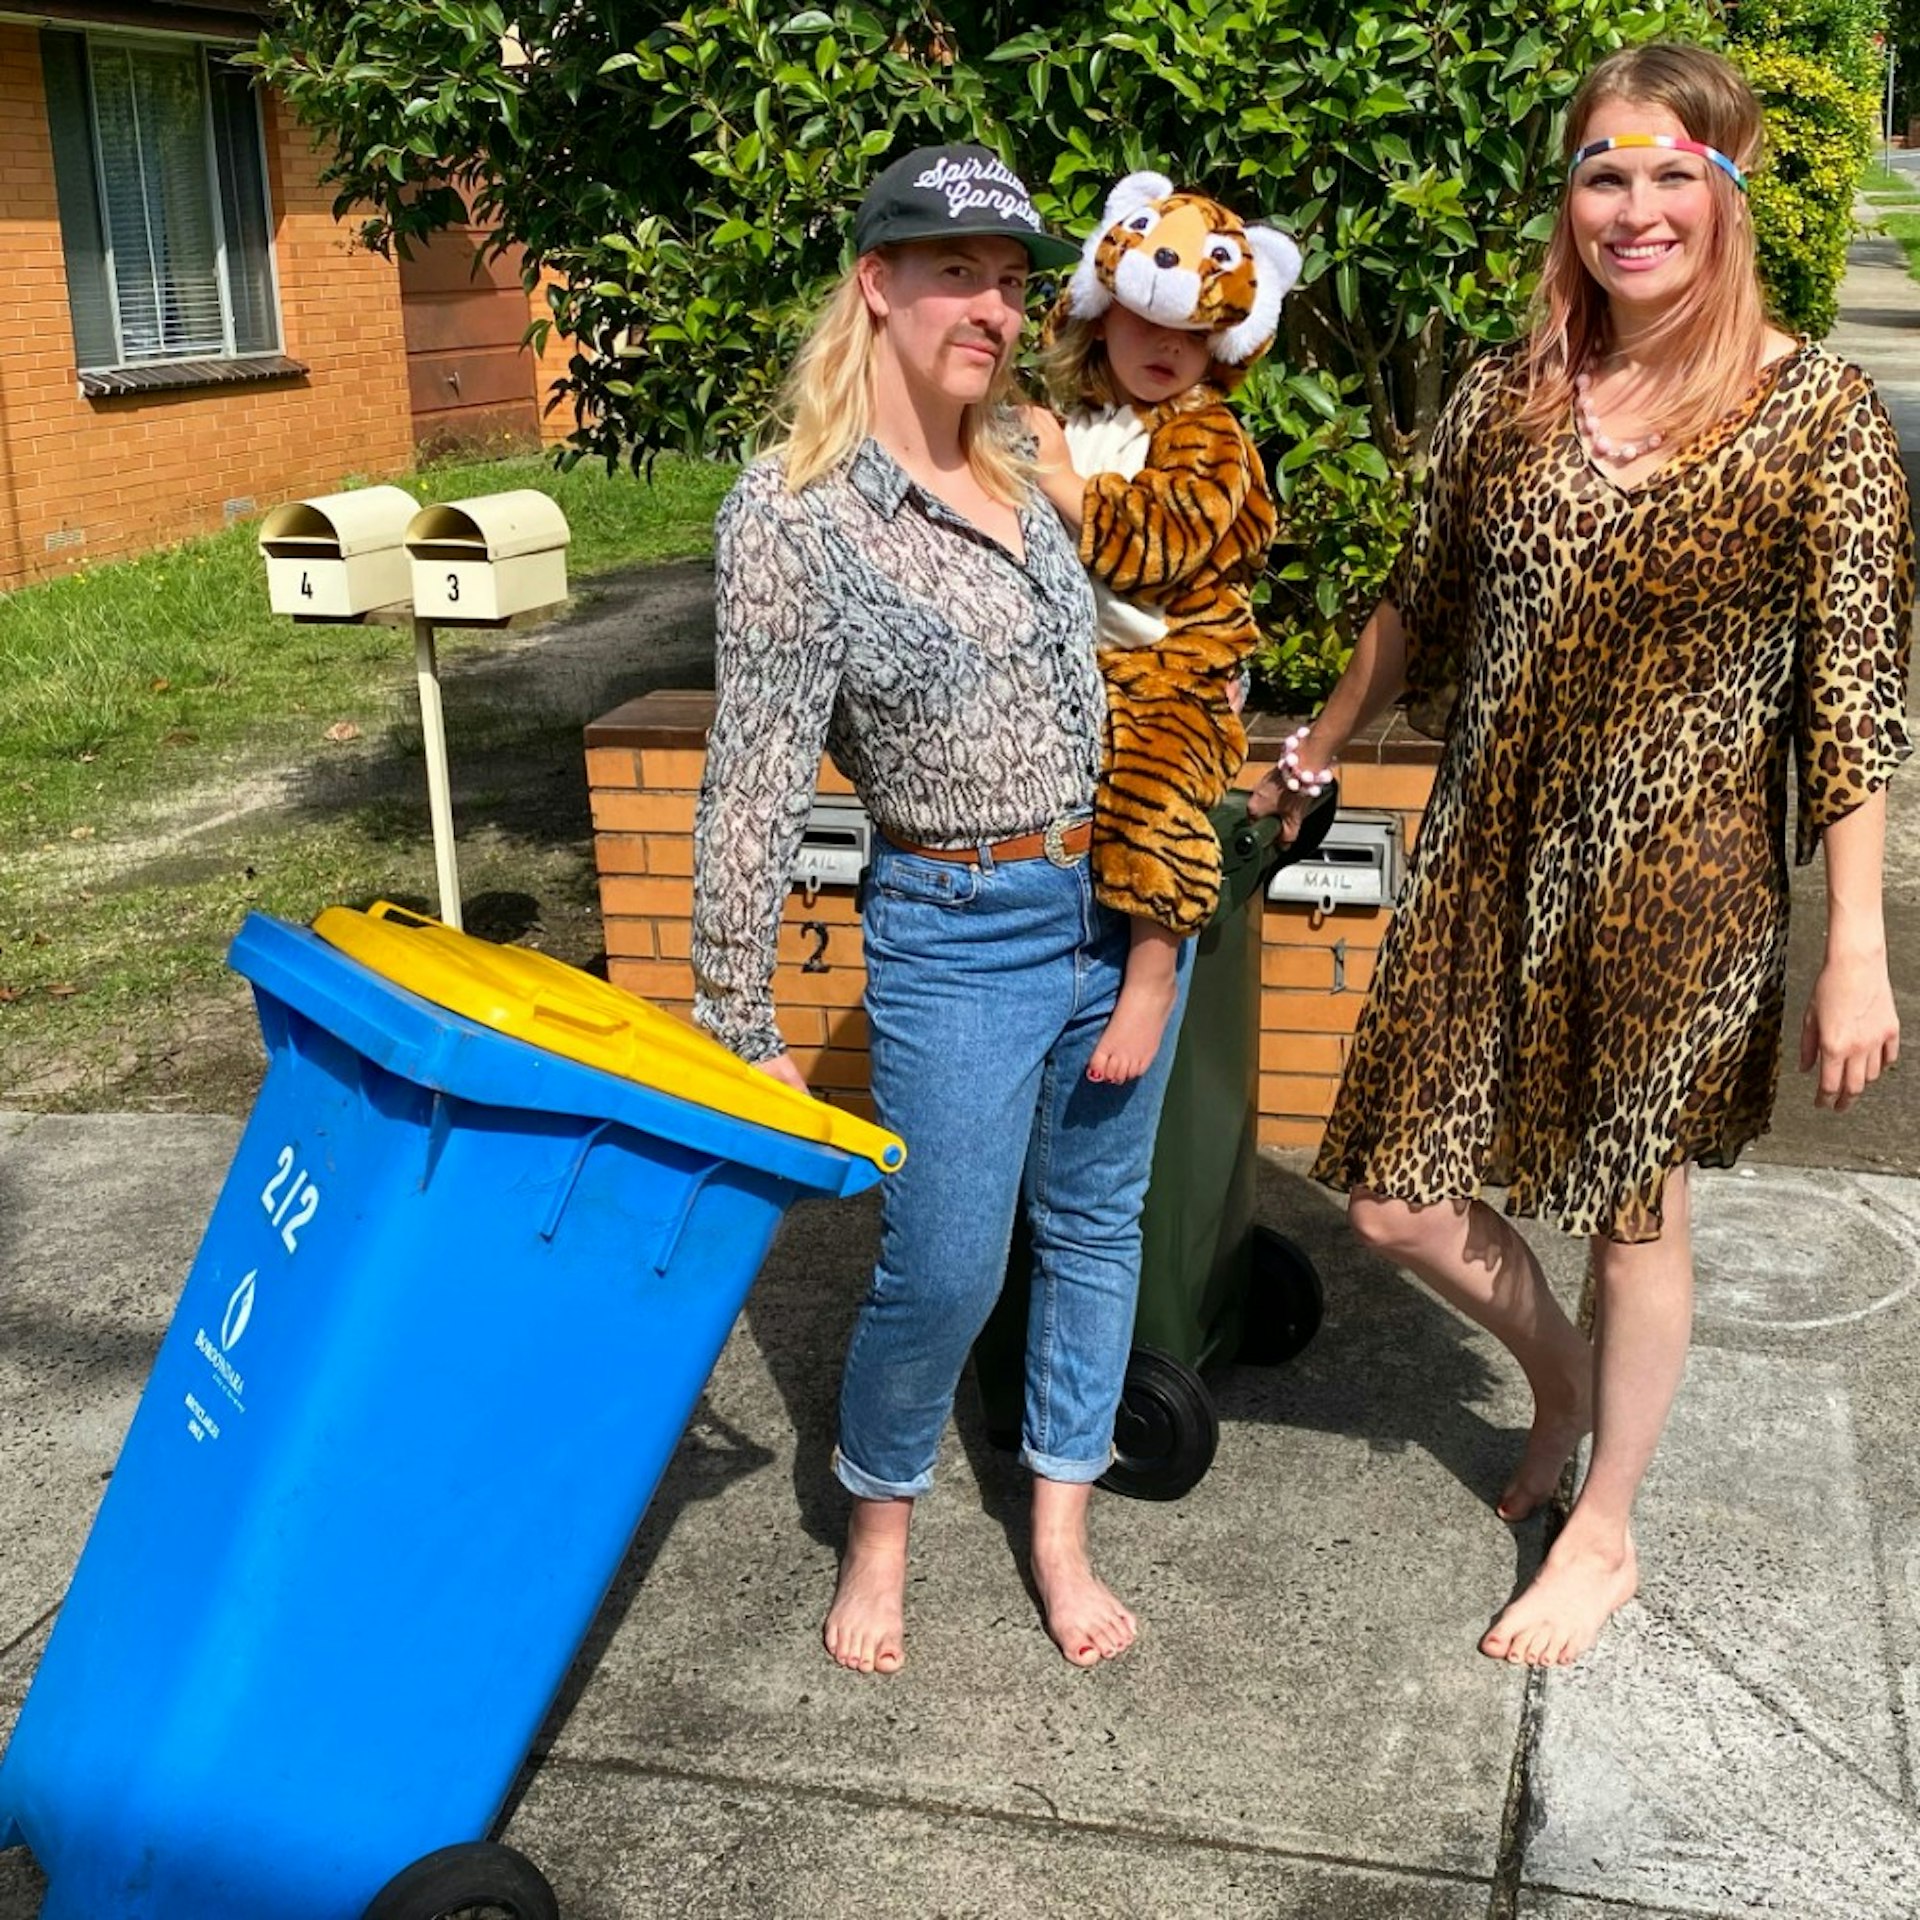 Two women and a child taking out the bin dressed like the stars of Tger King